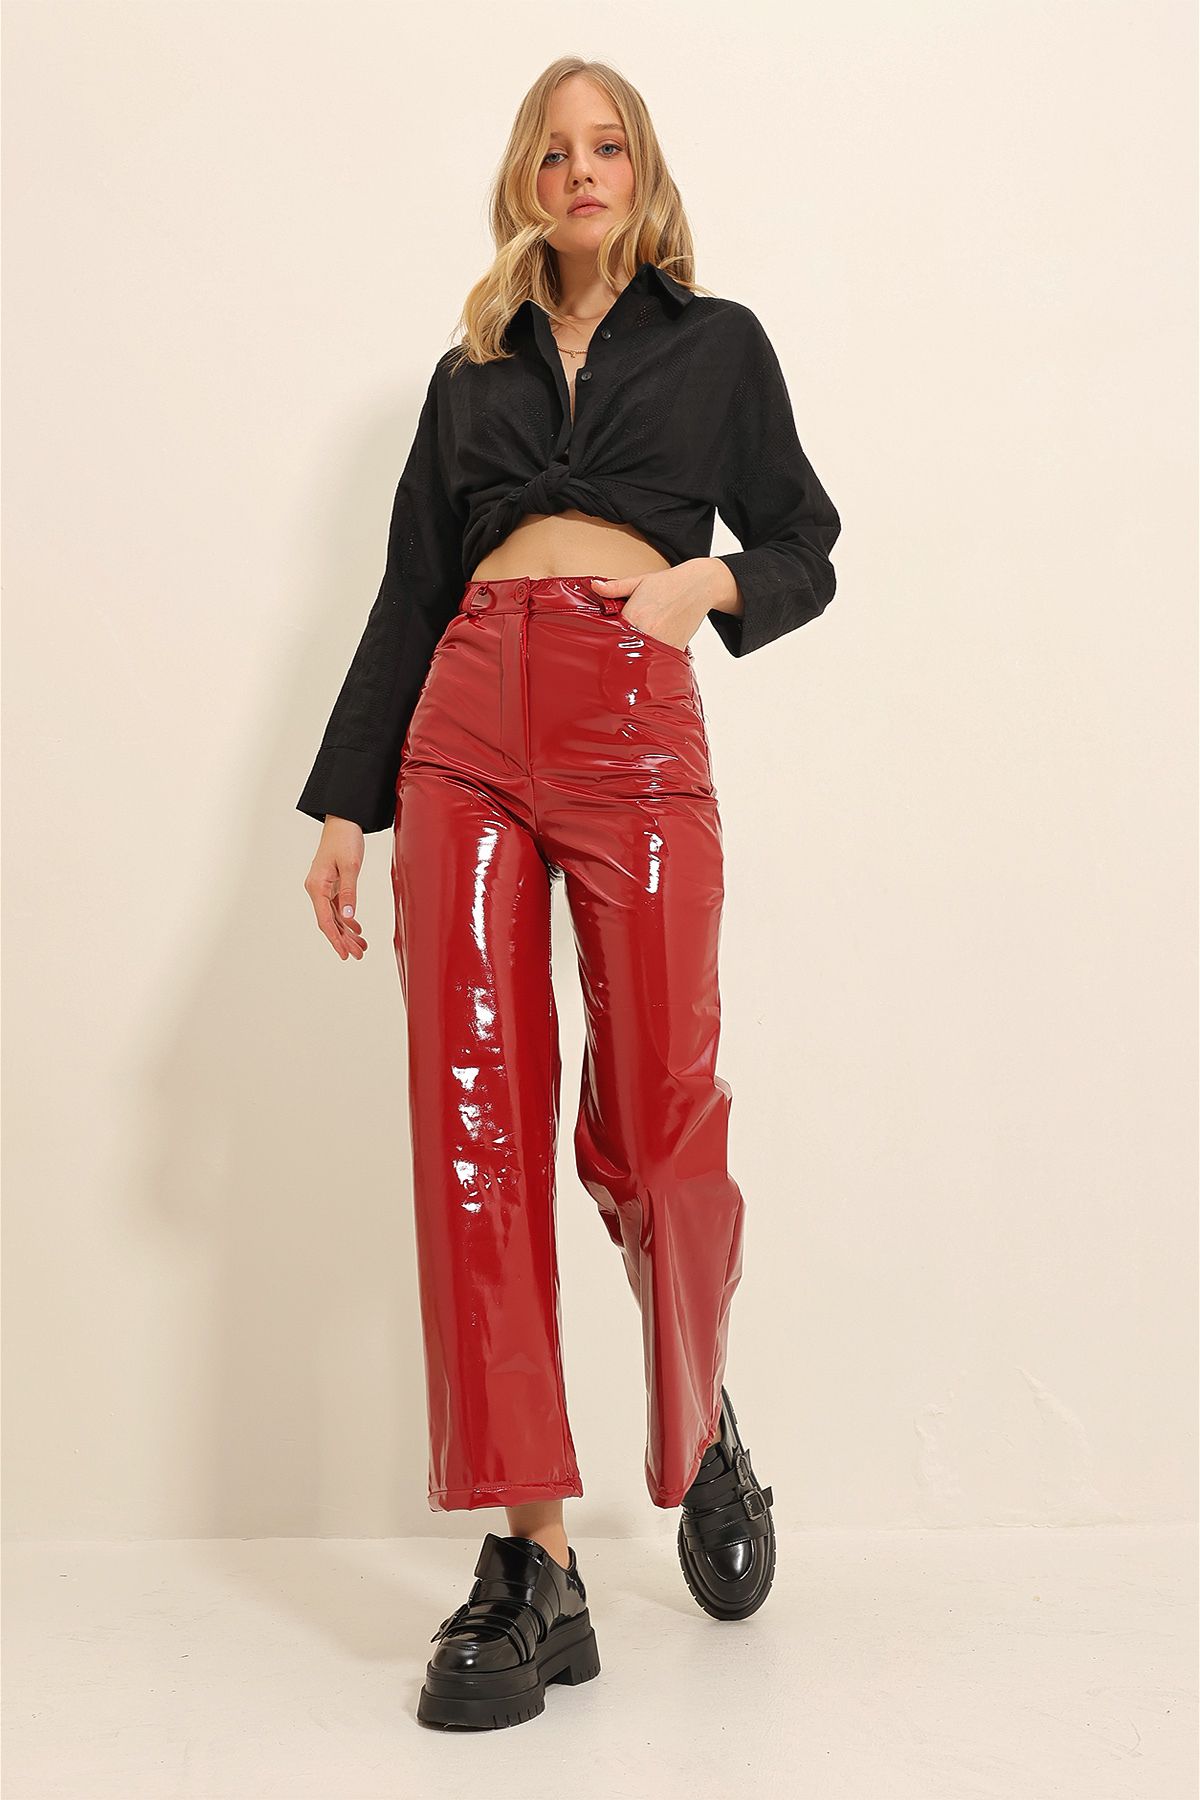 Leather Trousers Women's High Waist Brown Leather Leggings Push Up Patent  Leggings Shiny Sexy Patent Leather Trousers PU Leather Leggings Sexy Faux  Leather Trousers Skinny Imitation Leather Trousers : Amazon.co.uk: Fashion